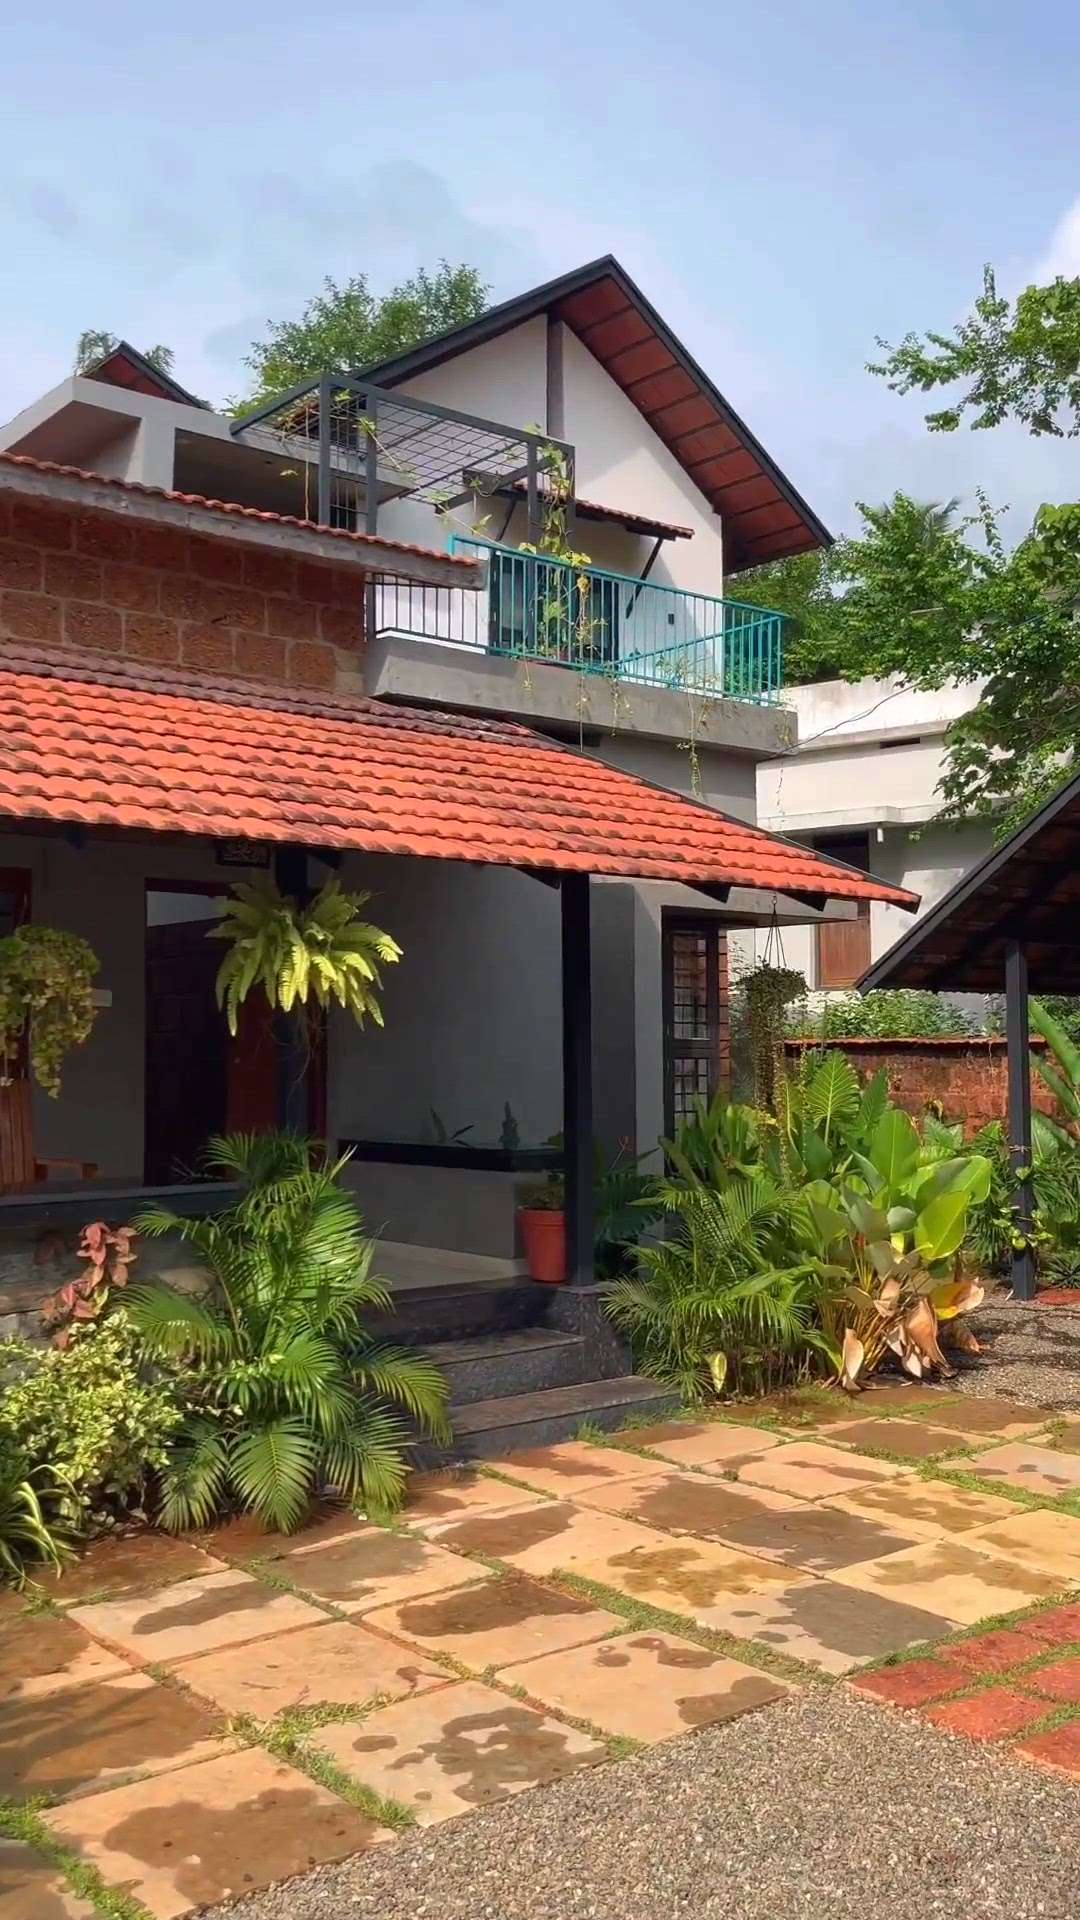 Blending Of Architectural And Modern Sculpture..
9061902672

 #architecturedesigns  #Architect  #Architectural&Interior  #kerala_architecture  #KeralaStyleHouse  #keralatraditionalmural  #keralaveedu  #TraditionalHouse  #TraditionalStyle